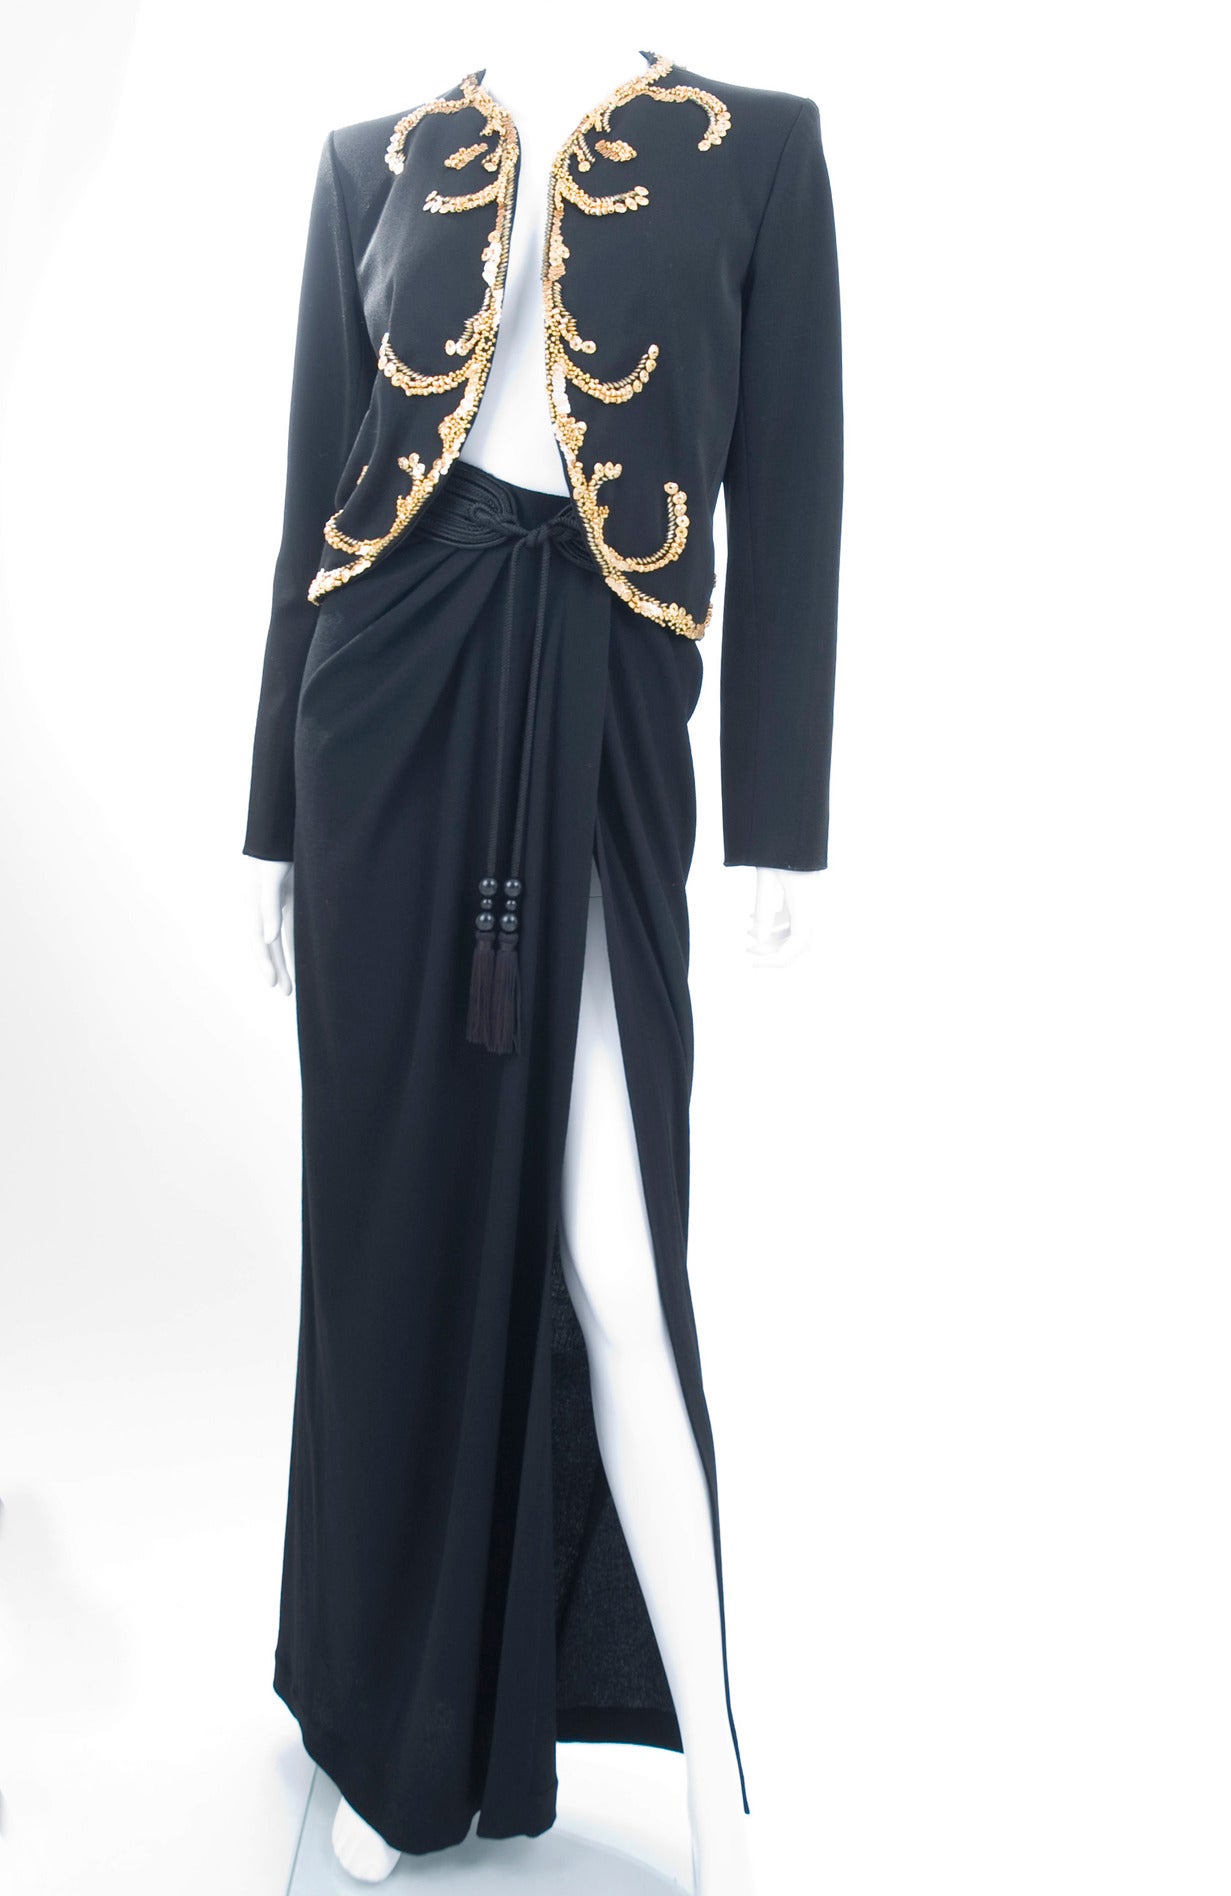 yves saint laurent evening dress of black organza with all-over embroidery